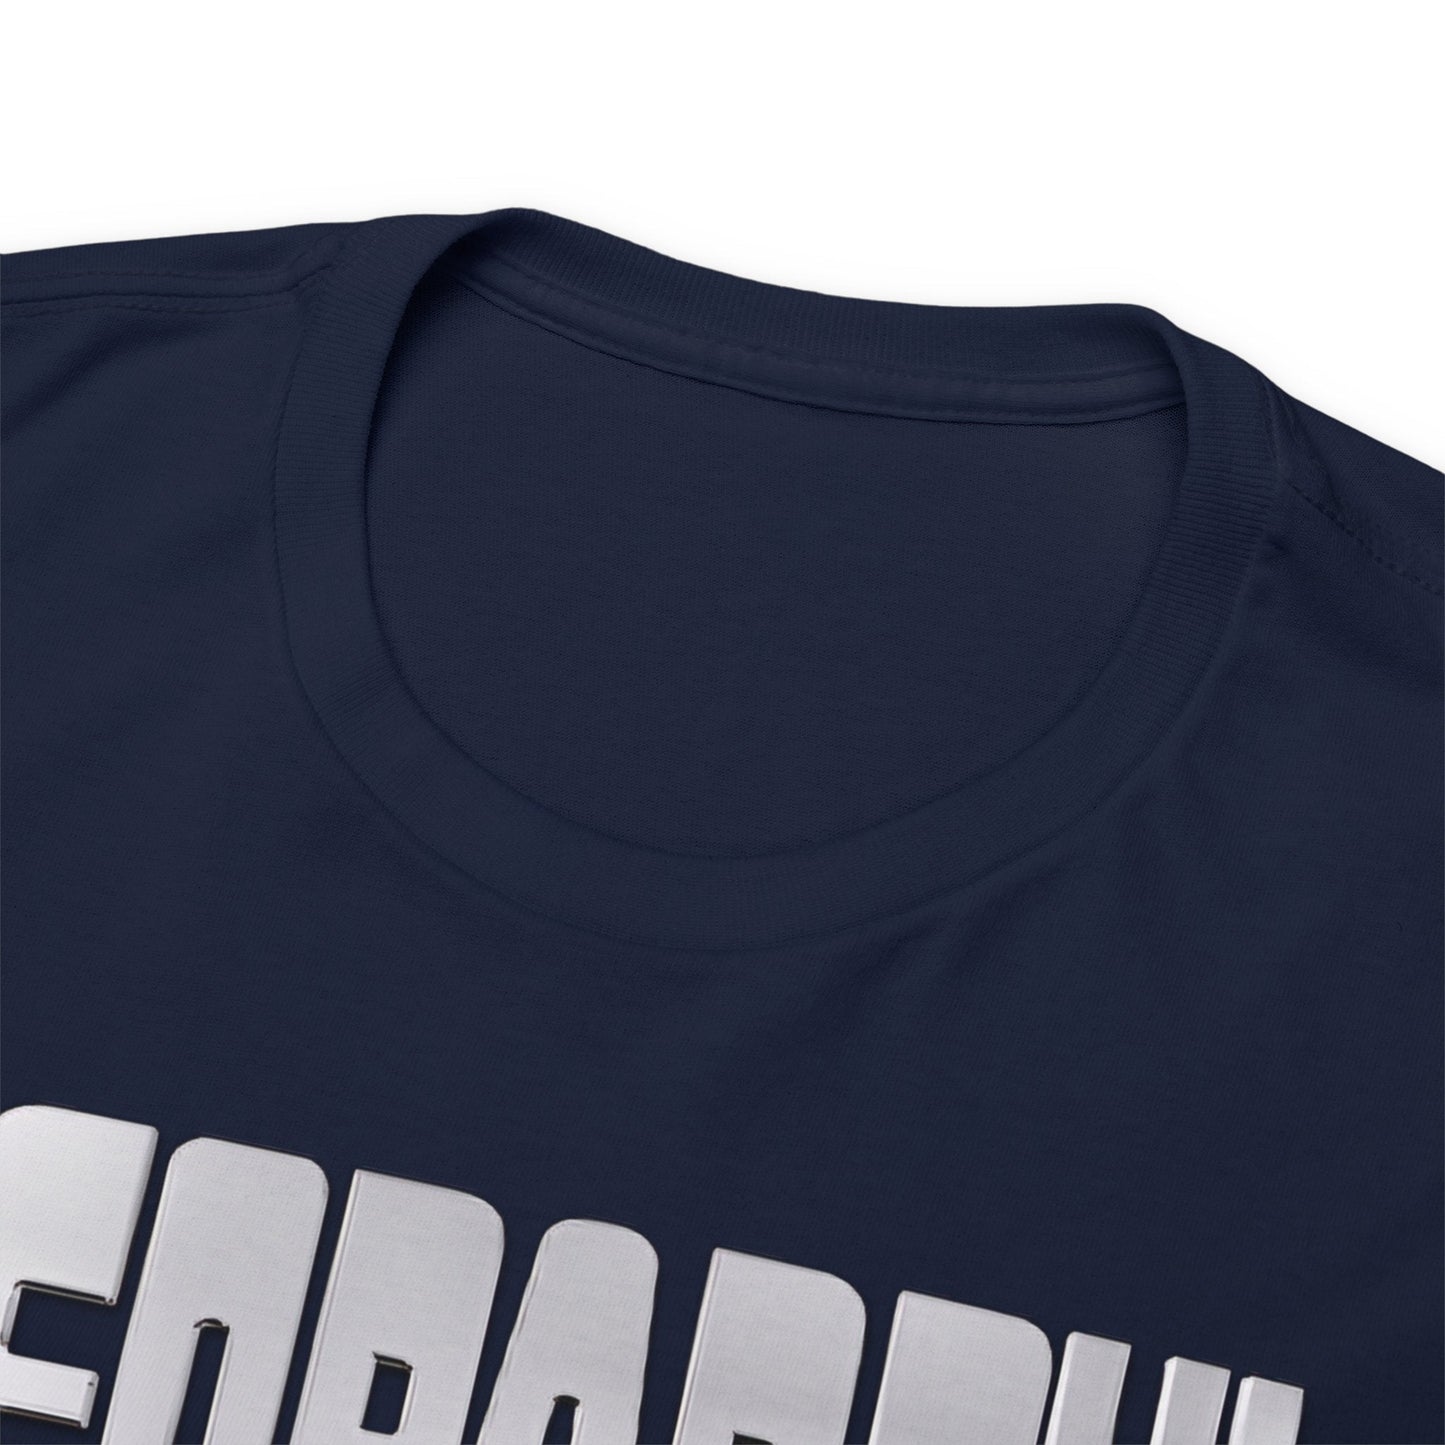 Jeopardy Game Show T-Shirt